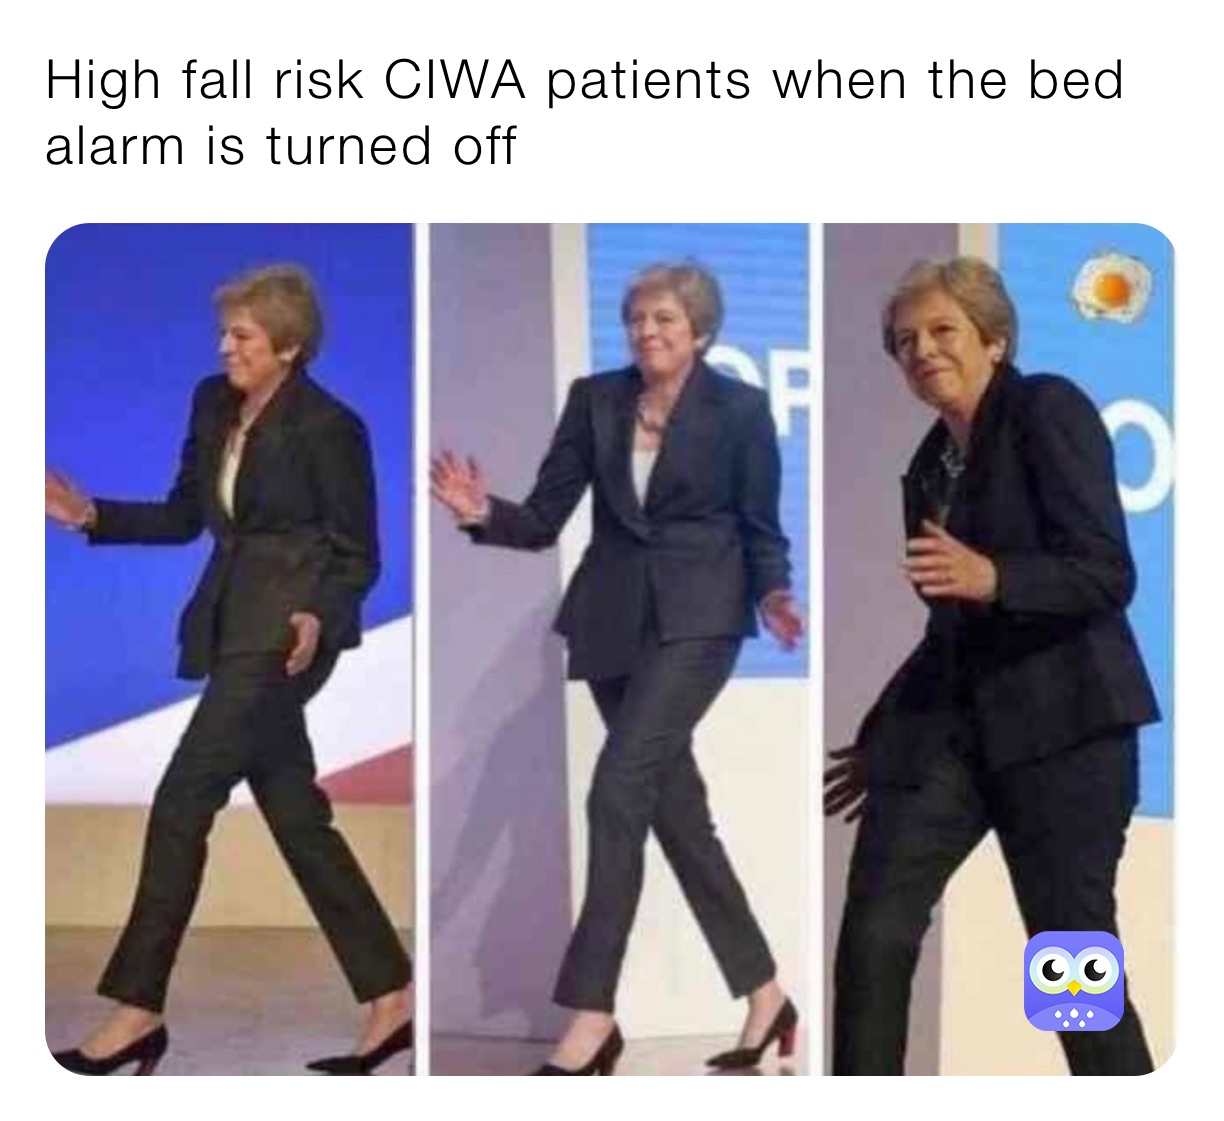 High fall risk CIWA patients when the bed alarm is turned off